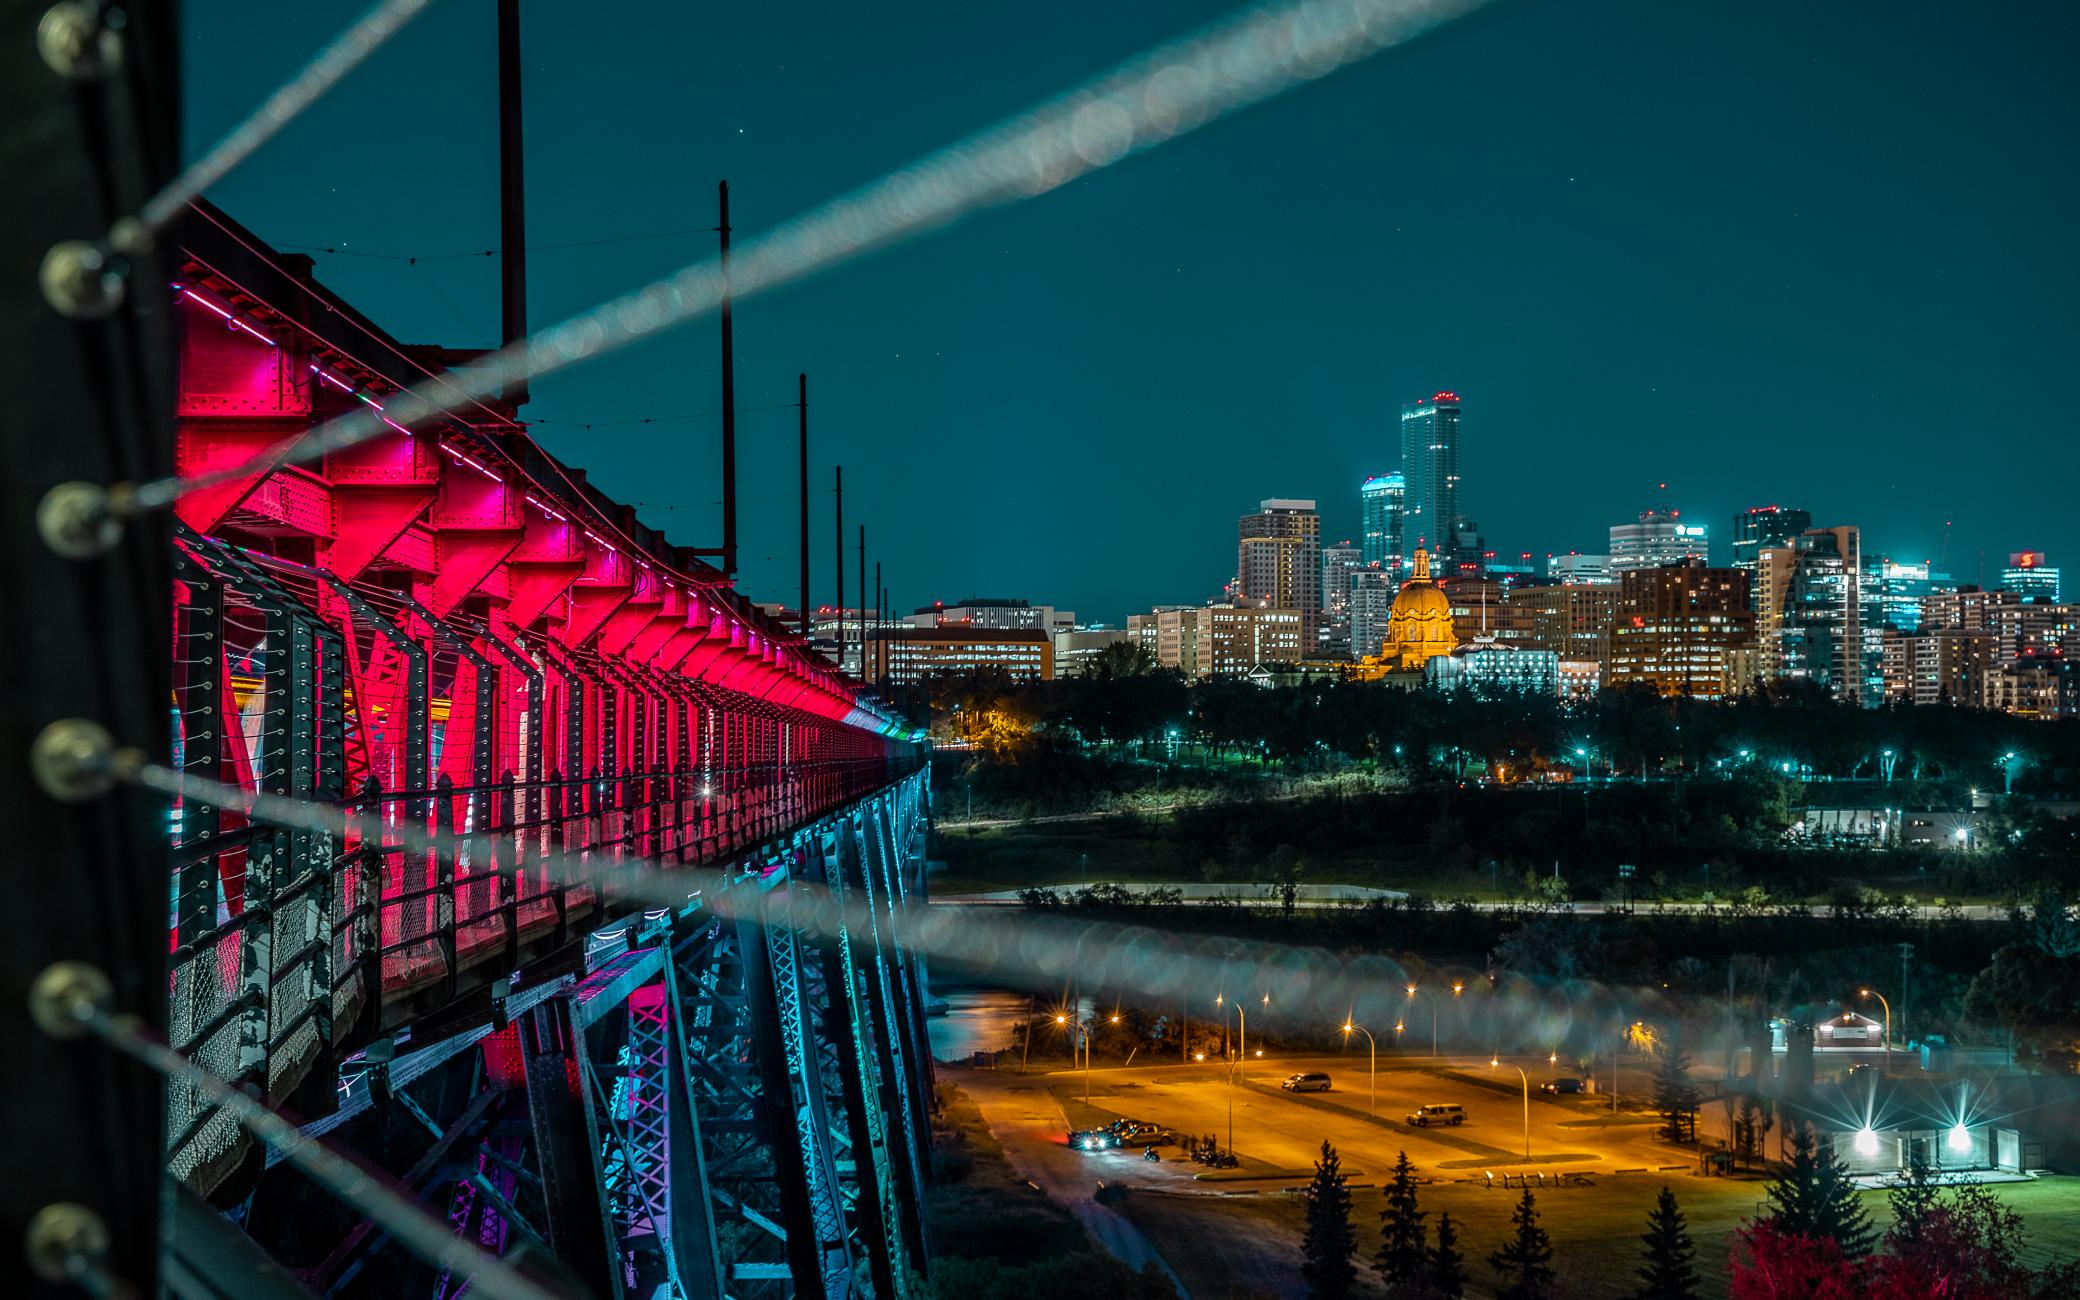 A close up of the High Level Bridge lit in red and blue with the city skyline at night.